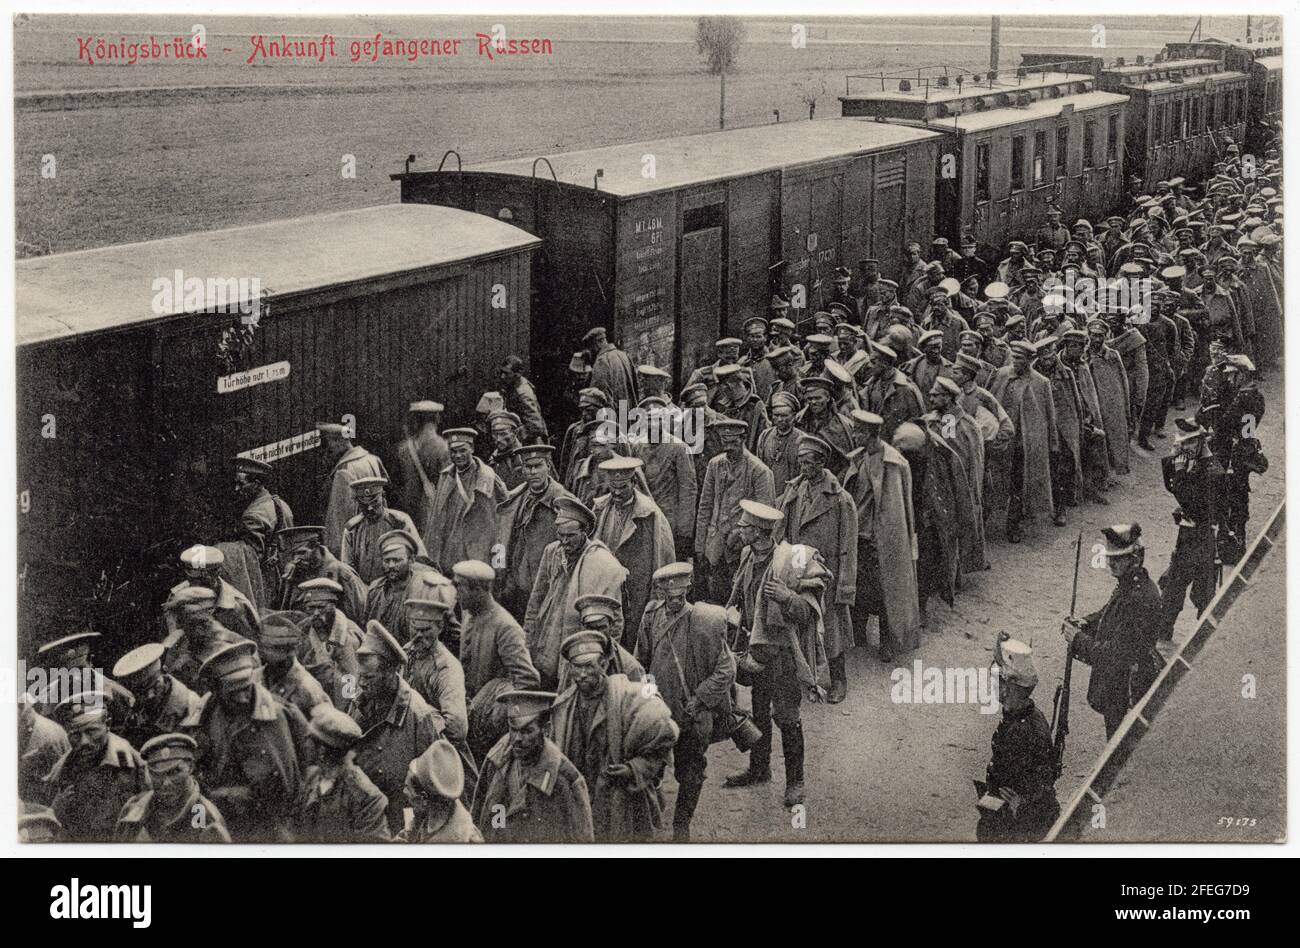 Arrival of Russian prisoners of war to the German POW Camp Königsbrück during the First World War (now Königsbrück, Saxony, Germany) depicted in the black and white vintage photograph by German photographer Carl Schmidt dated from 1914 to 1918 and issued as a postcard. Text in German means: Arrival of Russian prisoners. Courtesy of the Azoor Photo Collection. Stock Photo